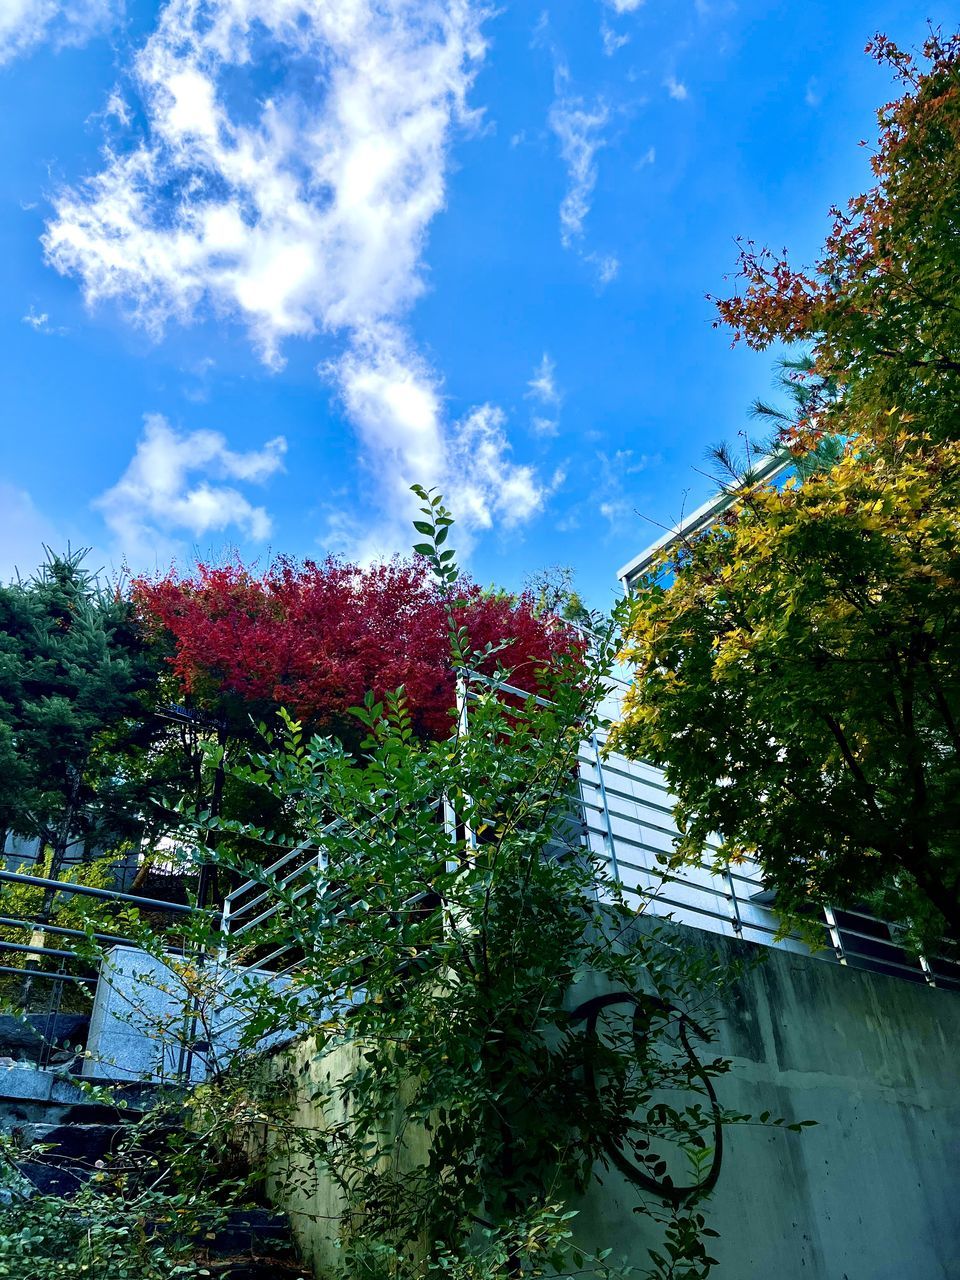 plant, sky, nature, tree, flower, cloud, leaf, no people, sunlight, growth, architecture, reflection, day, autumn, beauty in nature, outdoors, green, garden, built structure, blue, flowering plant, low angle view, building exterior